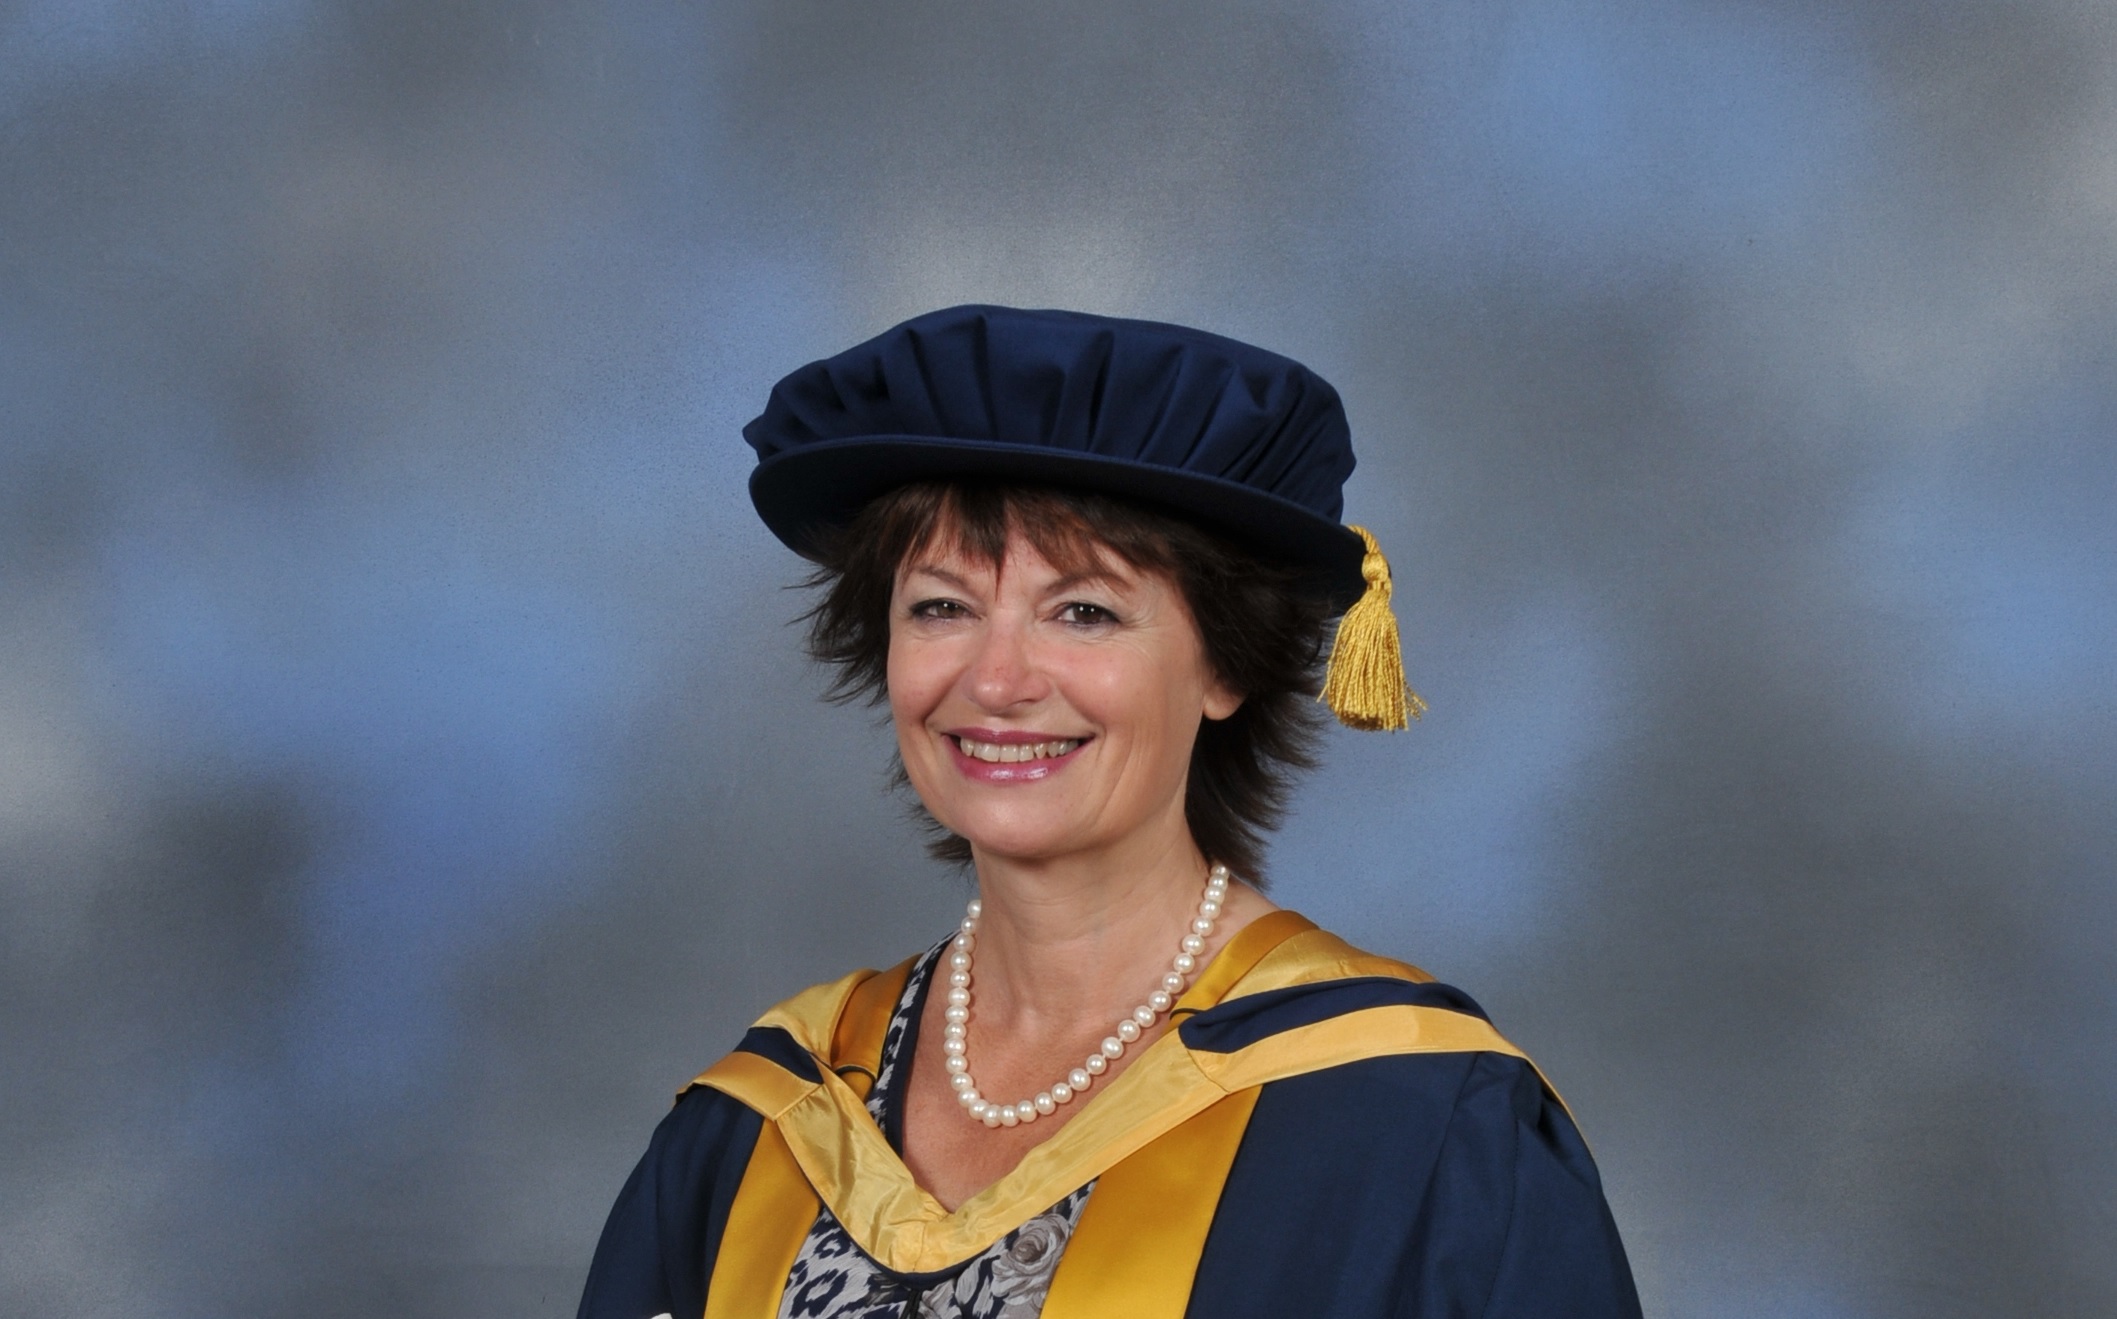 A photo of Dame Anne Glover in her graduation outfit